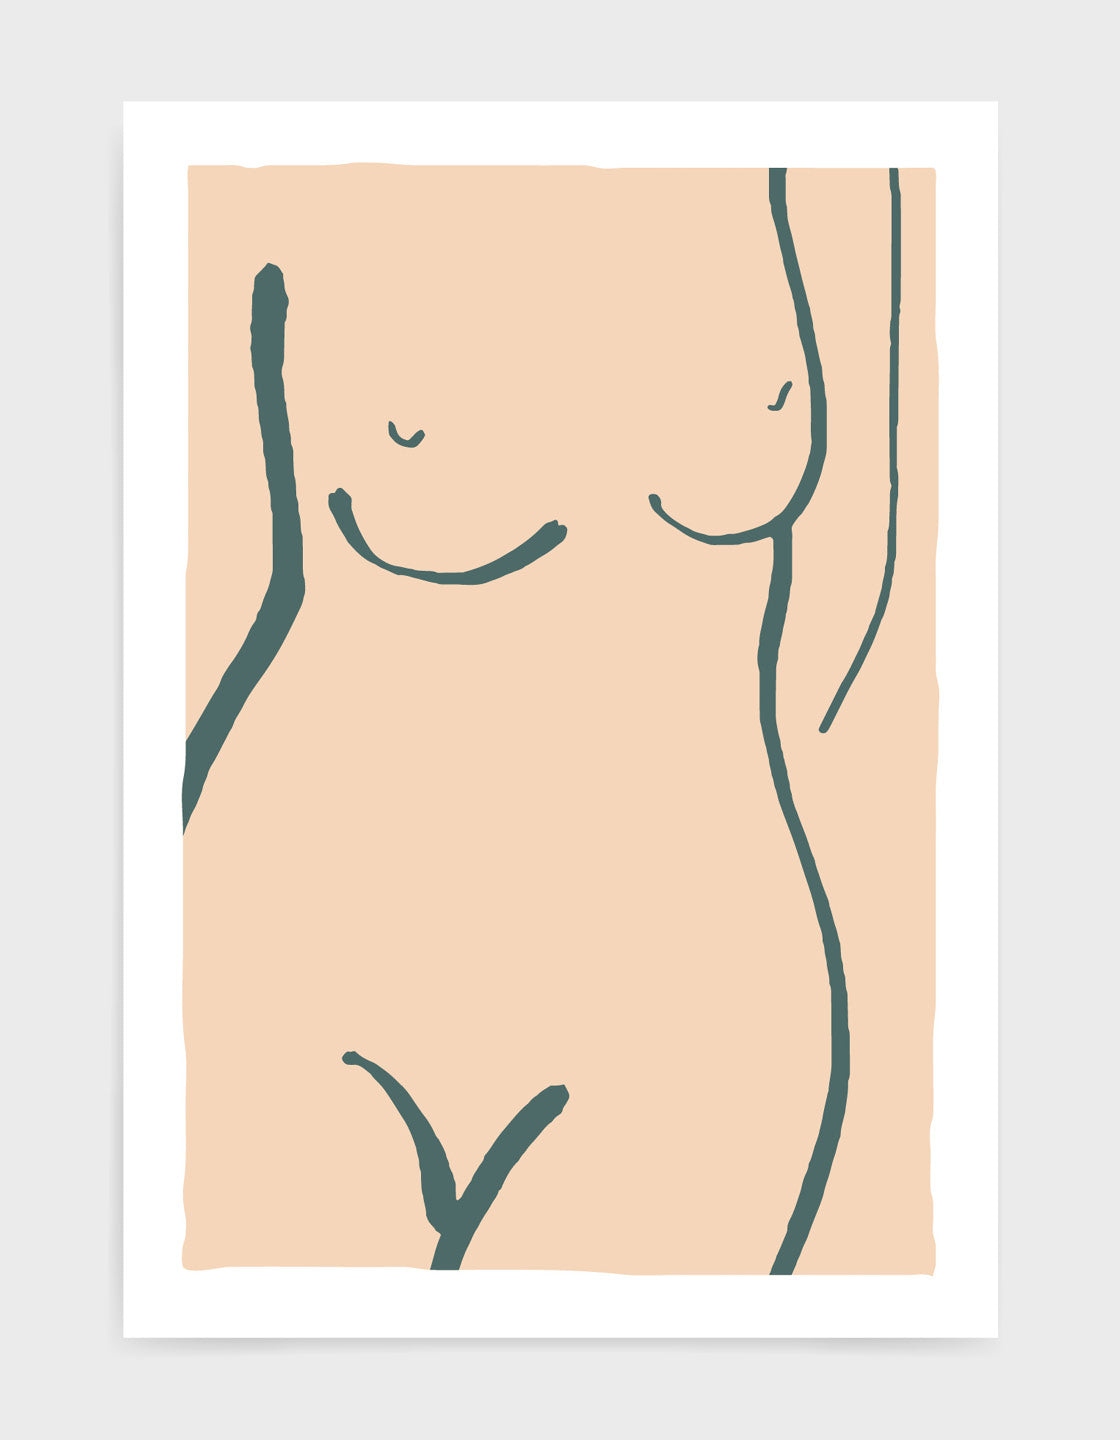 grey line drawing of a naked woman's torso against a salmon pink background